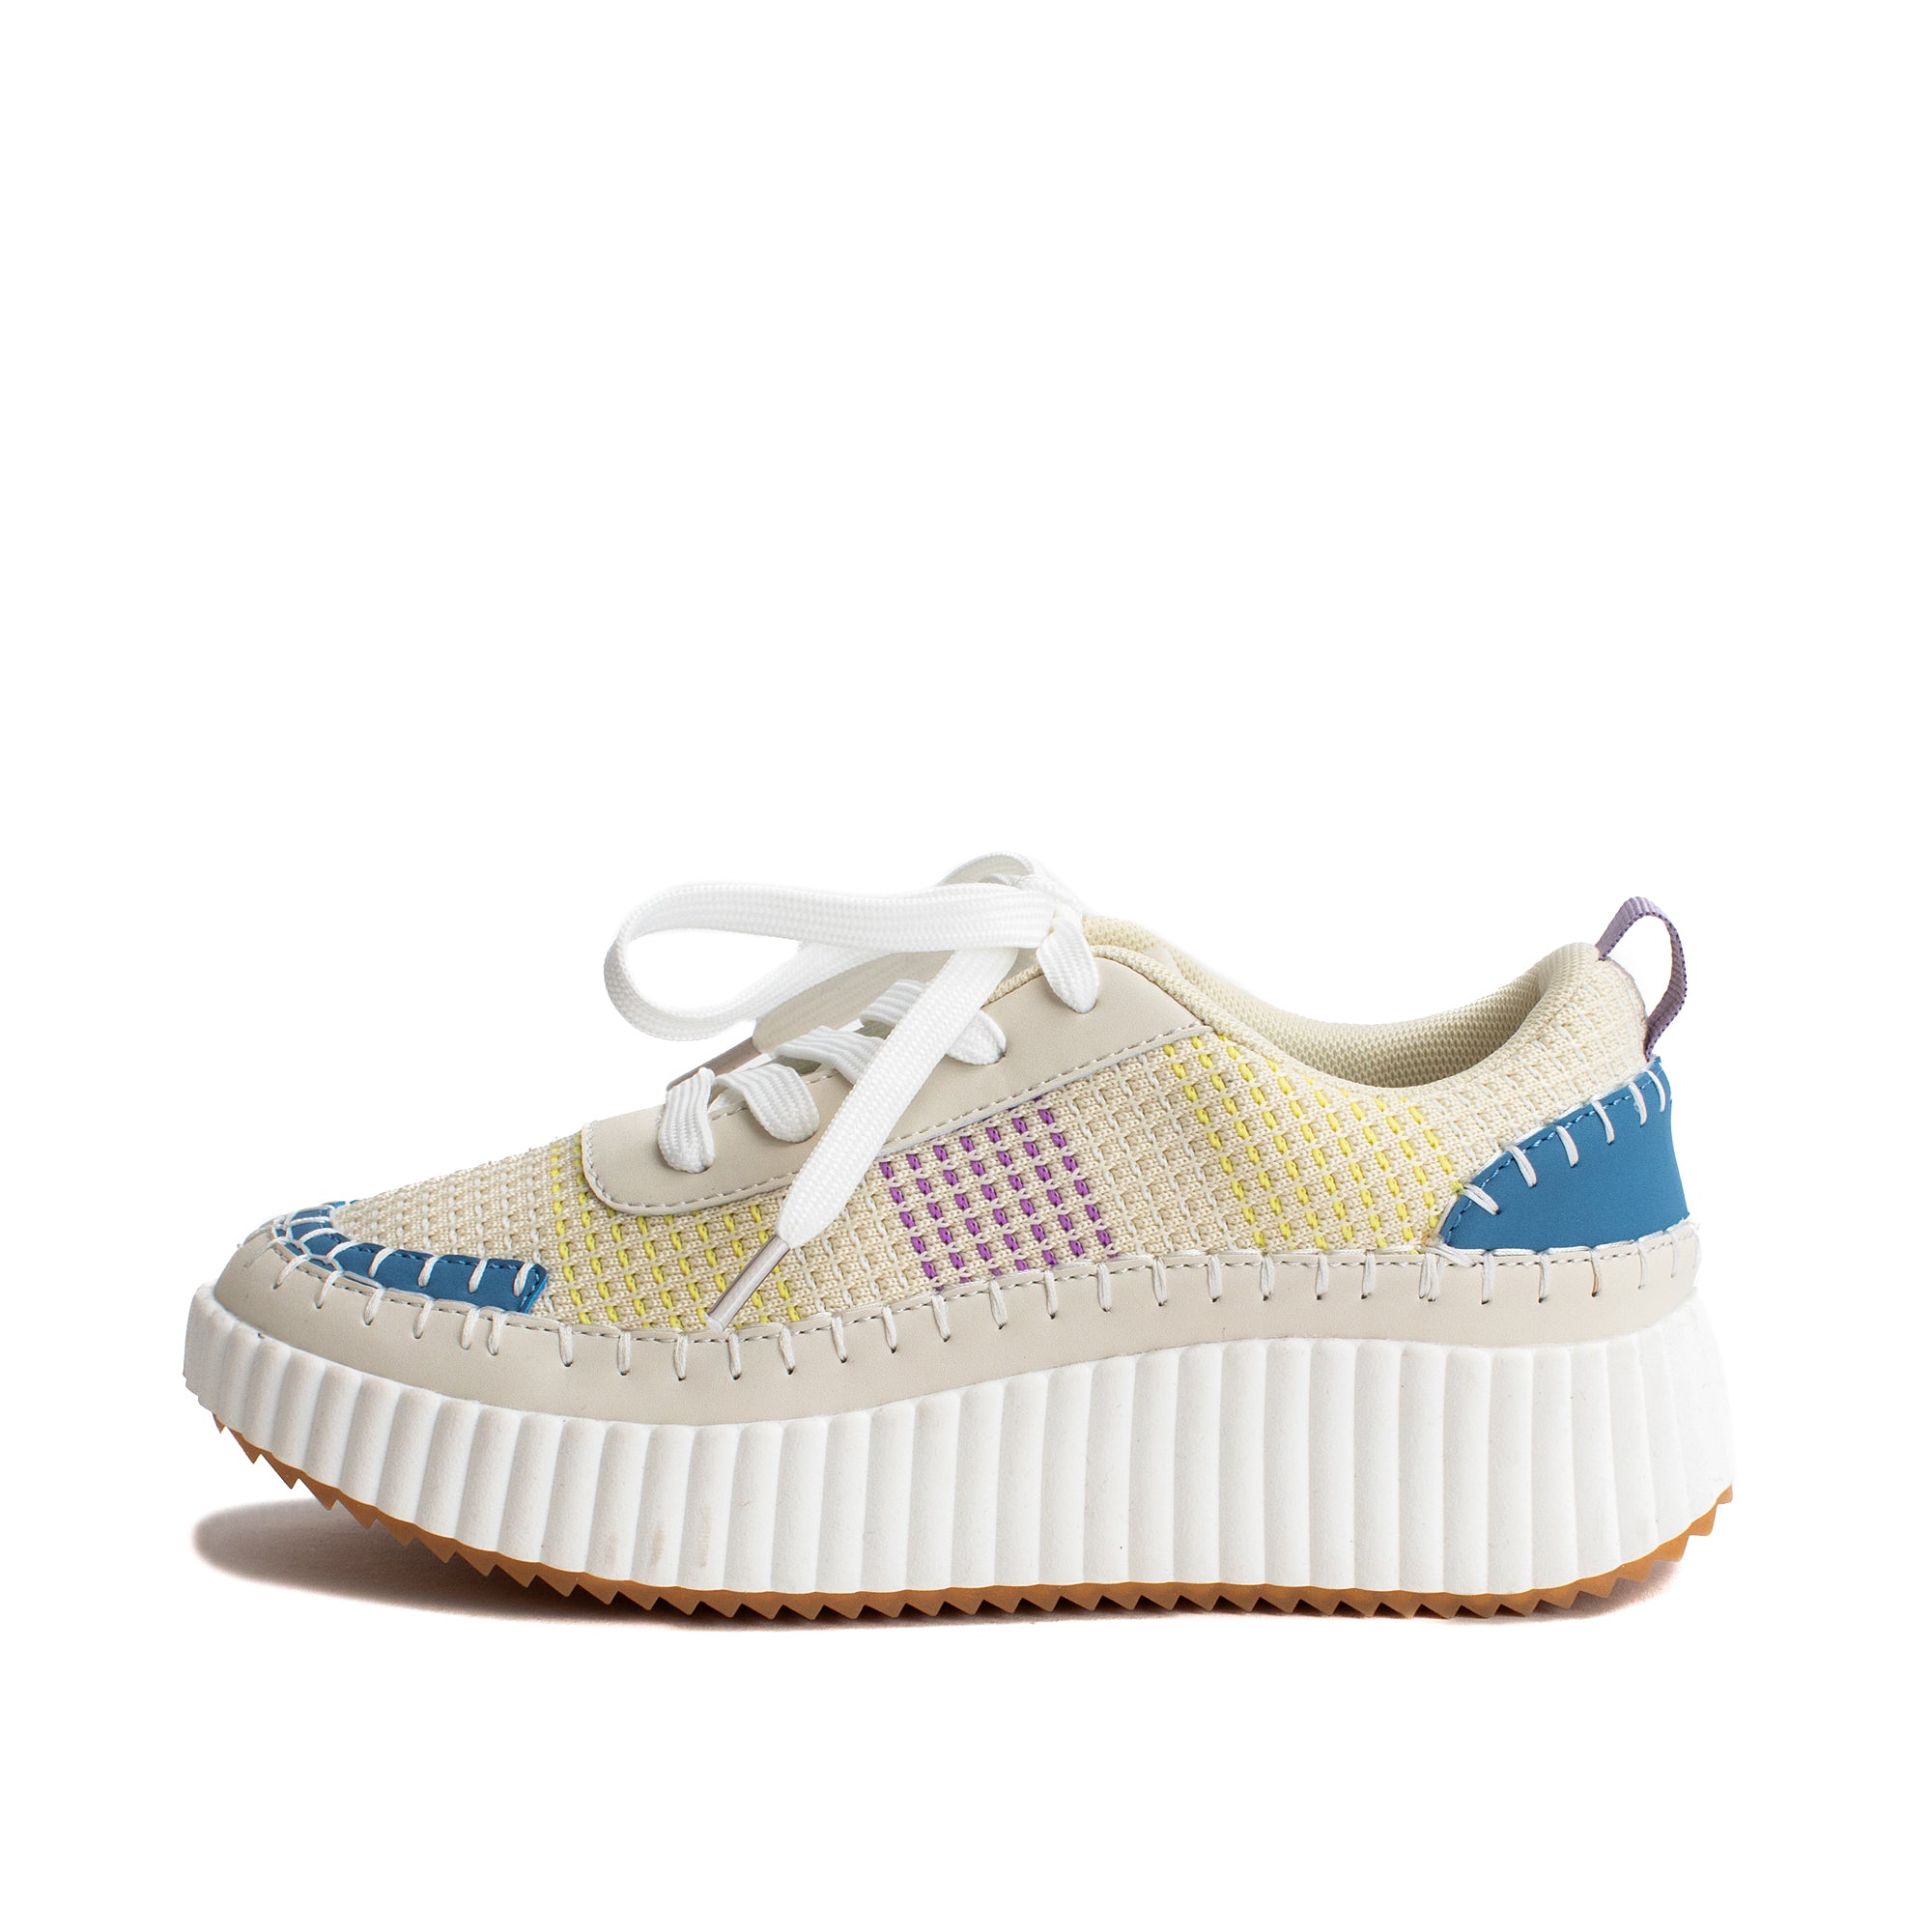 Women's Sneakers & Flats | Yellow Box Official Site – Tagged 